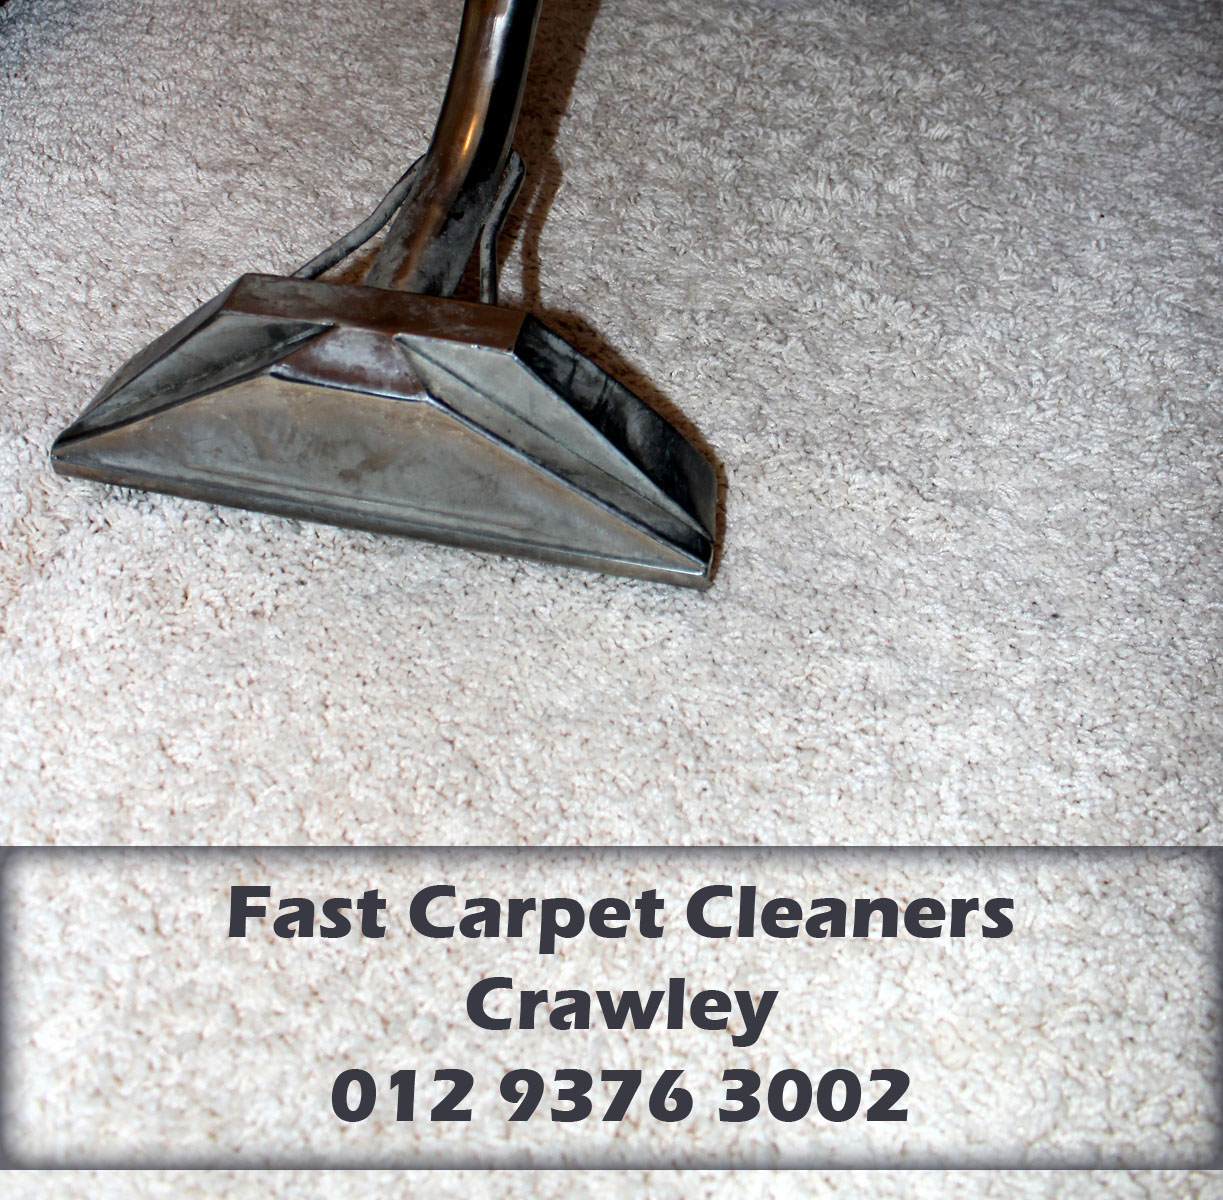 Carpet-Cleaning-Service-Crawley